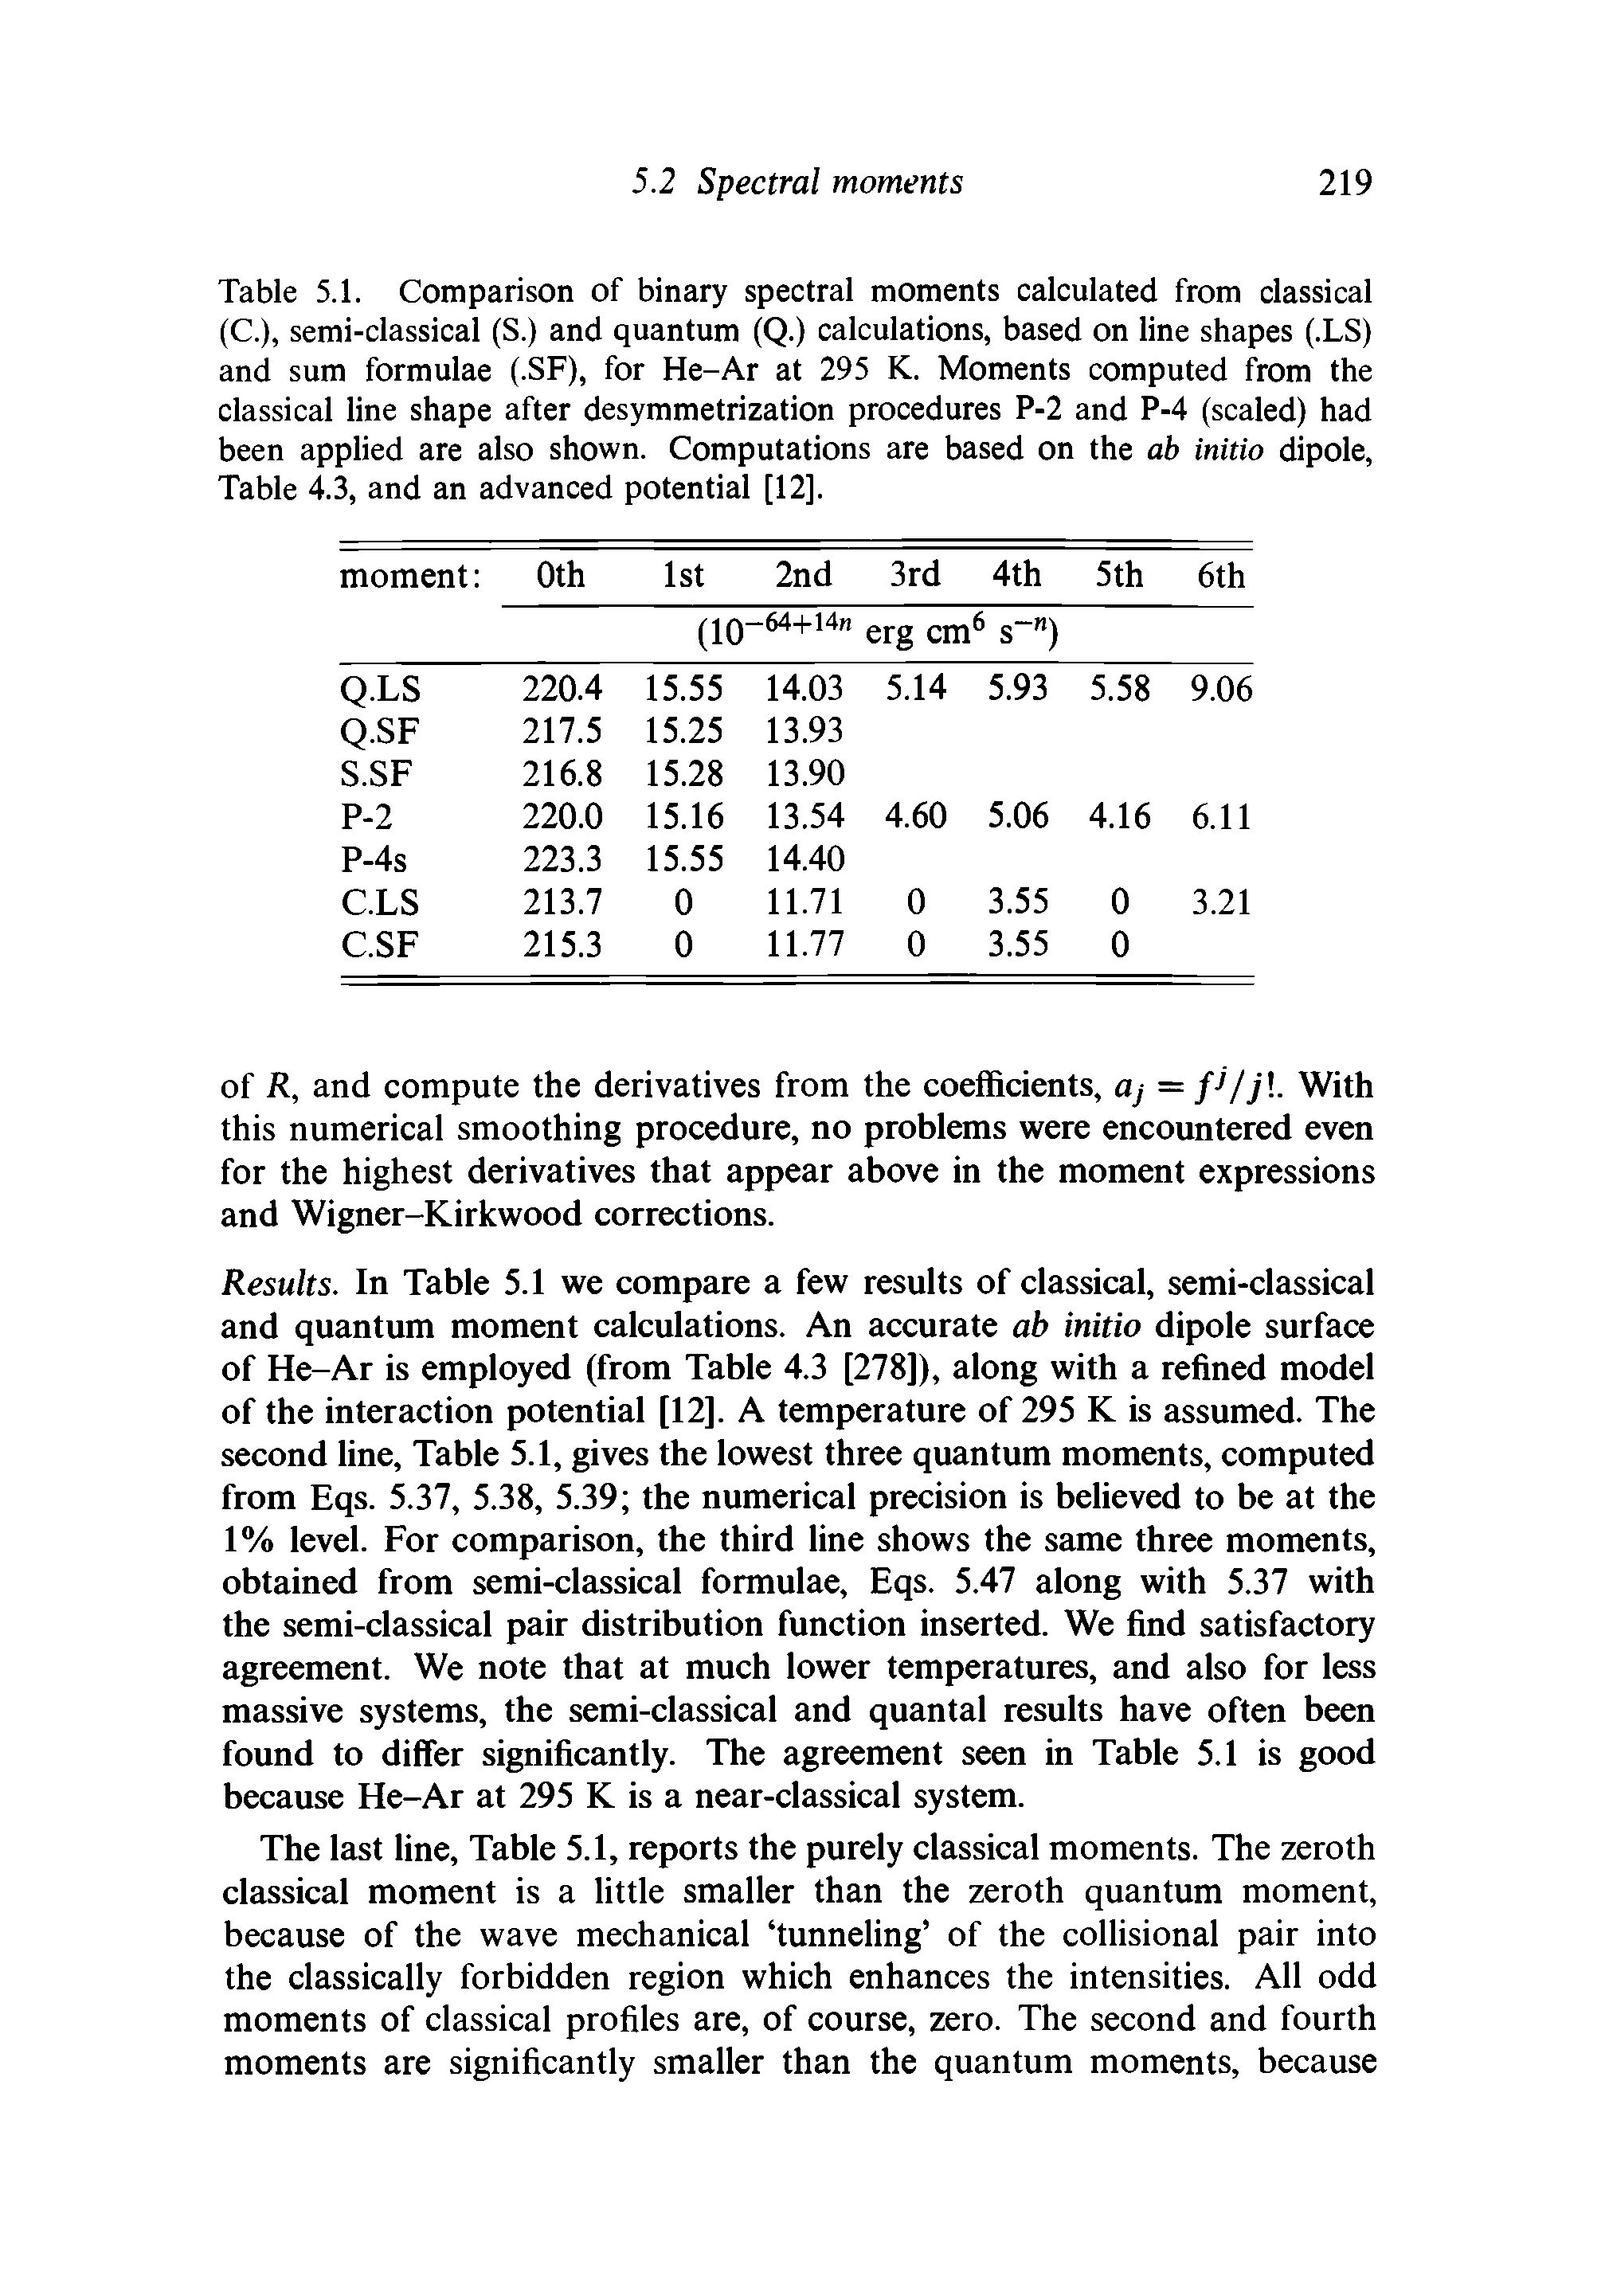 Table 5.1. Comparison of binary spectral moments calculated from classical (C.), semi-classical (S.) and quantum (Q.) calculations, based on line shapes (.LS) and sum formulae (.SF), for He-Ar at 295 K. Moments computed from the classical line shape after desymmetrization procedures P-2 and P-4 (scaled) had been applied are also shown. Computations are based on the ab initio dipole, Table 4.3, and an advanced potential [12].